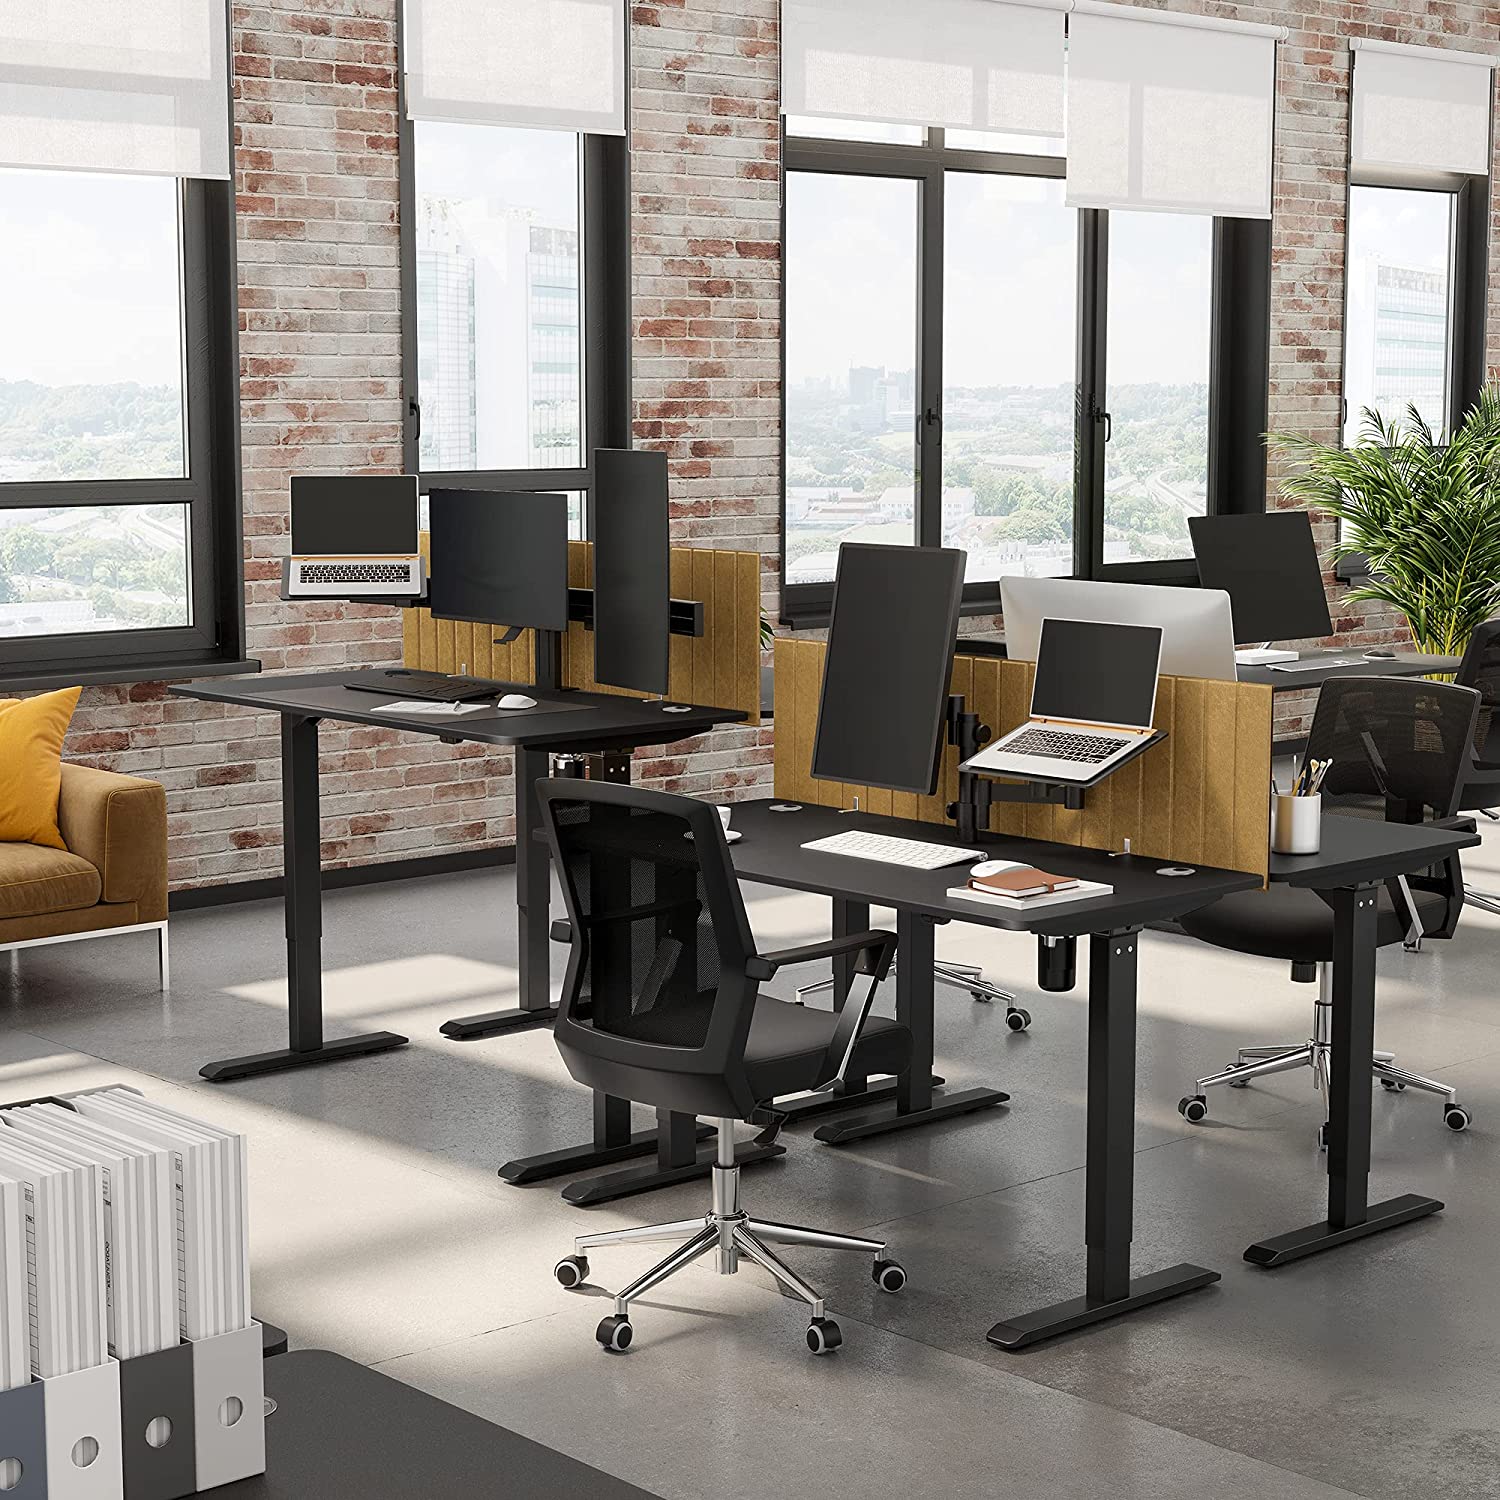 Nancy's Canonto Desk - Height Adjustable - Sit-Stand Desk - Automatic - Cable Management - Office Table - Black/White - MDF - Steel - 140 x 70 x (73-114)